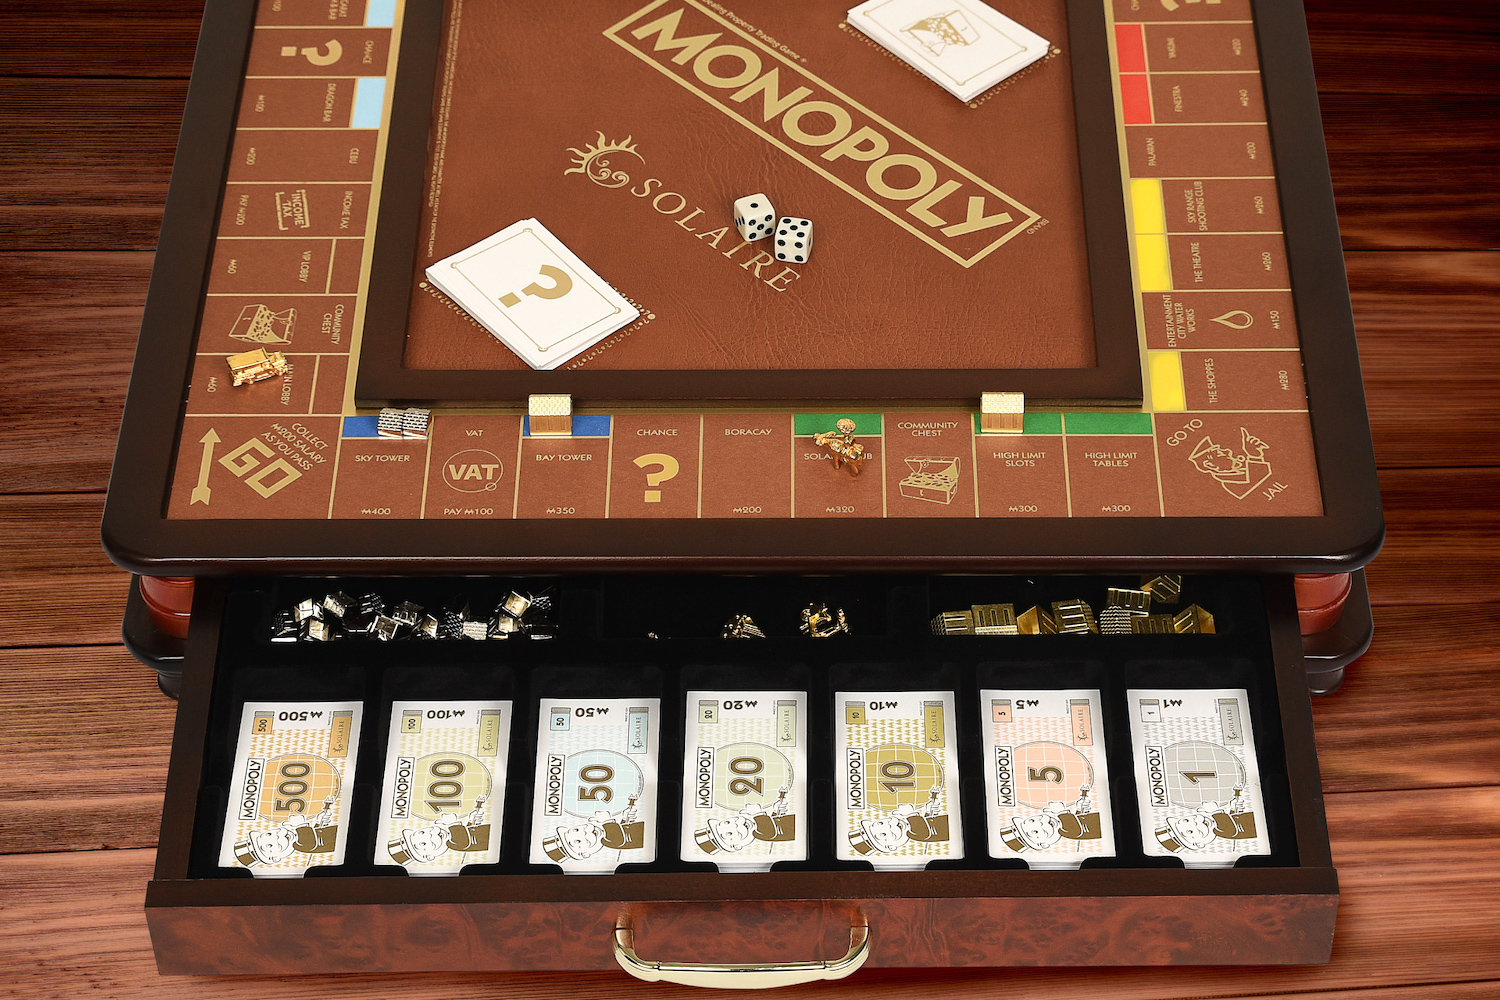 The Solaire x Monopoly deluxe edition